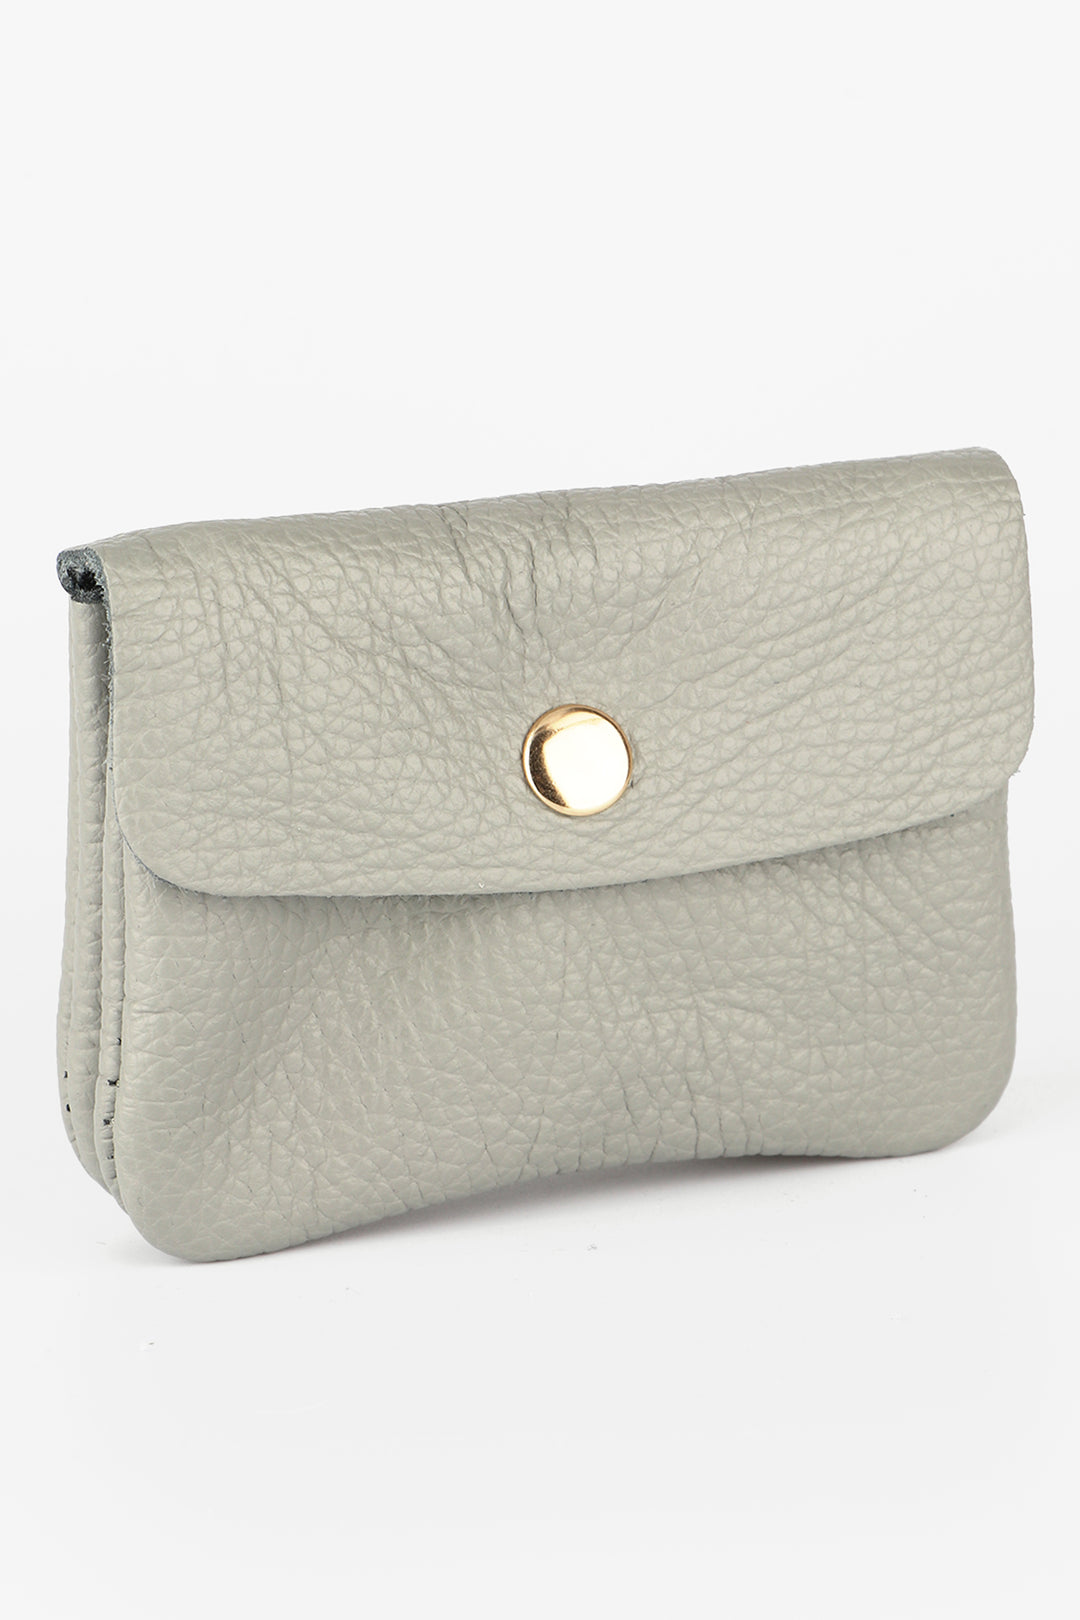 light grey italian leather coin purse with a button snap closure